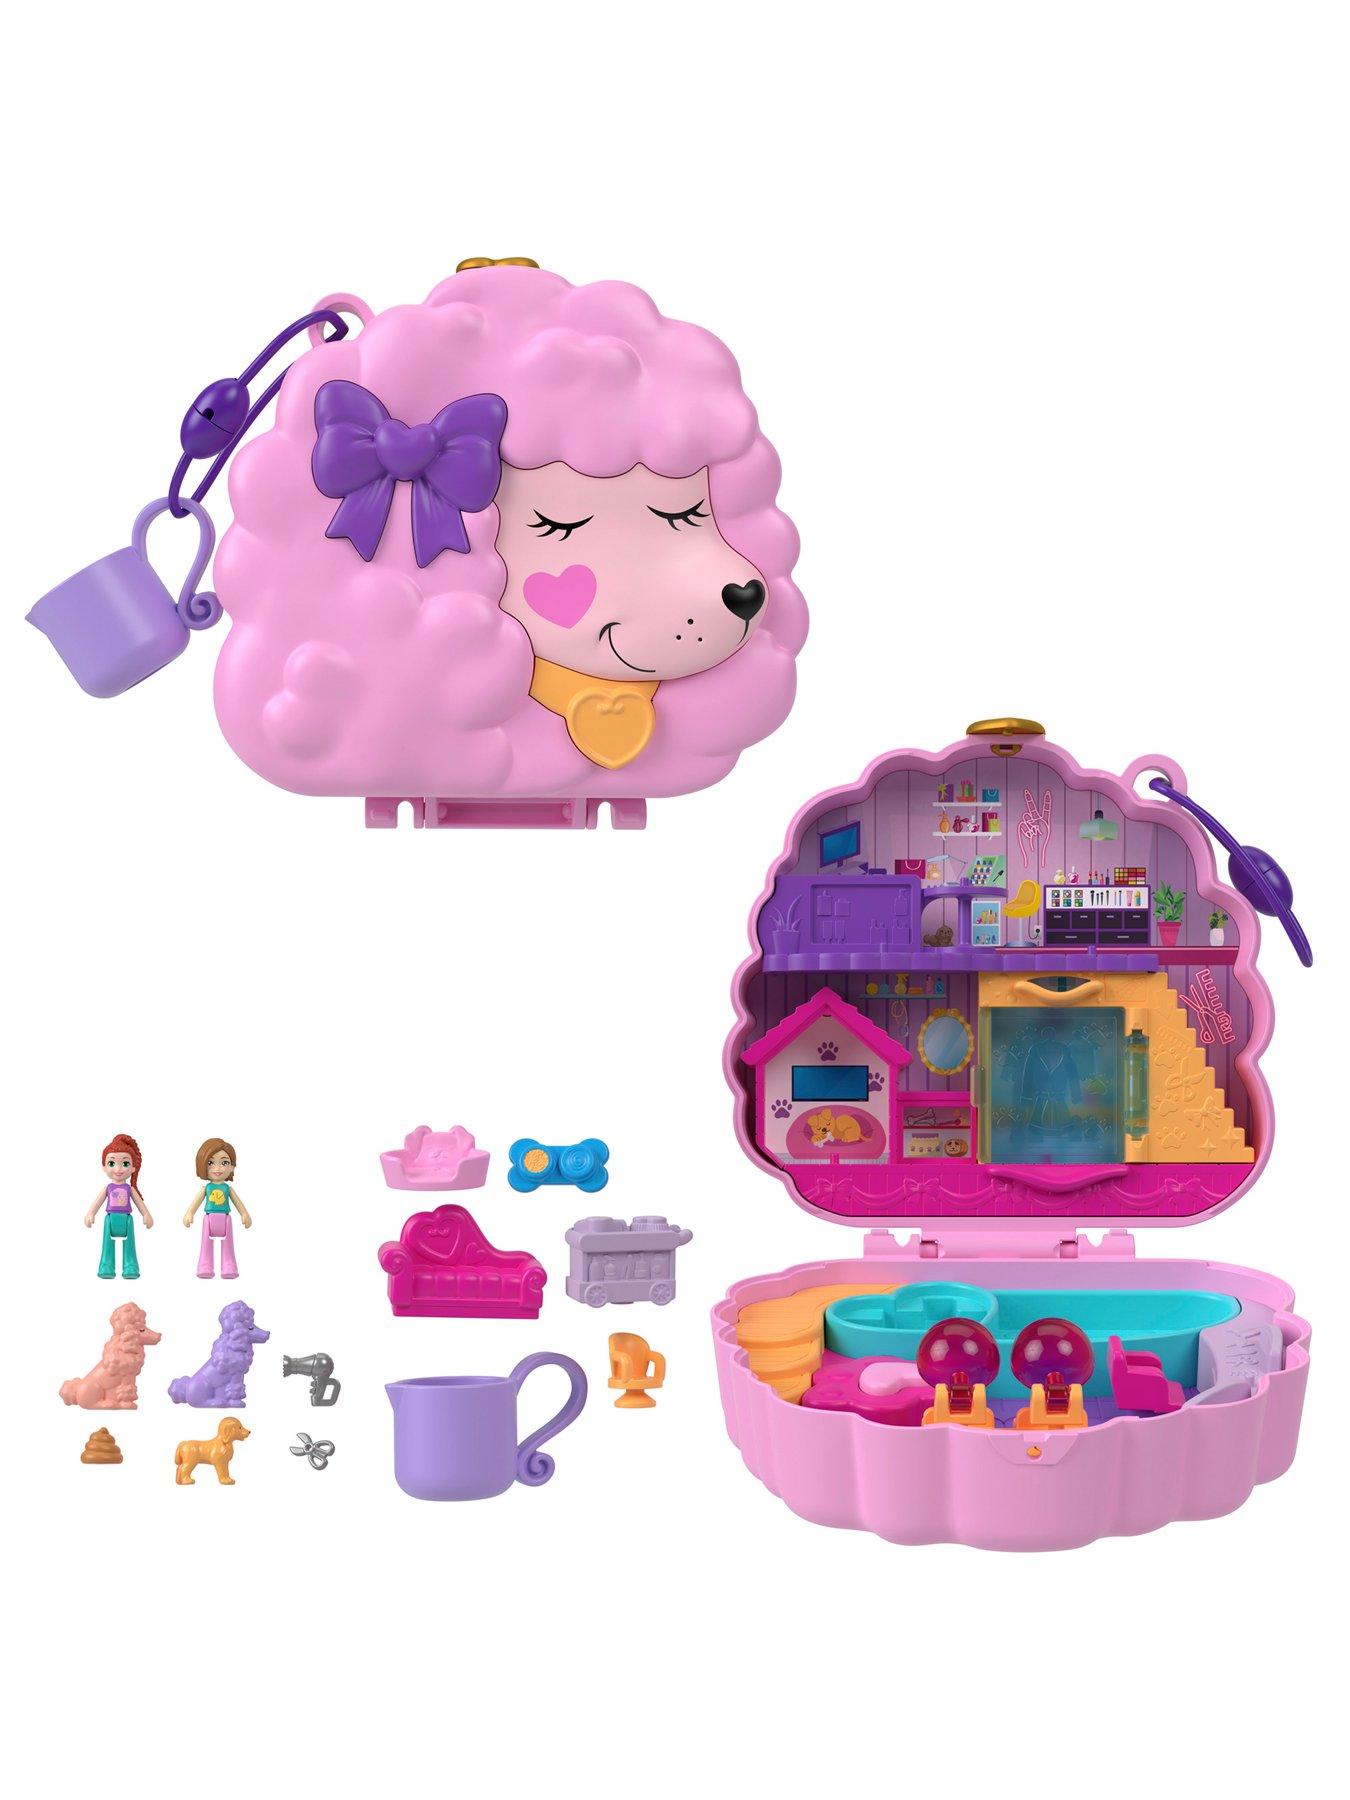 Polly Pocket 2-in-1 Koala Purse Travel Toy with 2 Micro Dolls, 1